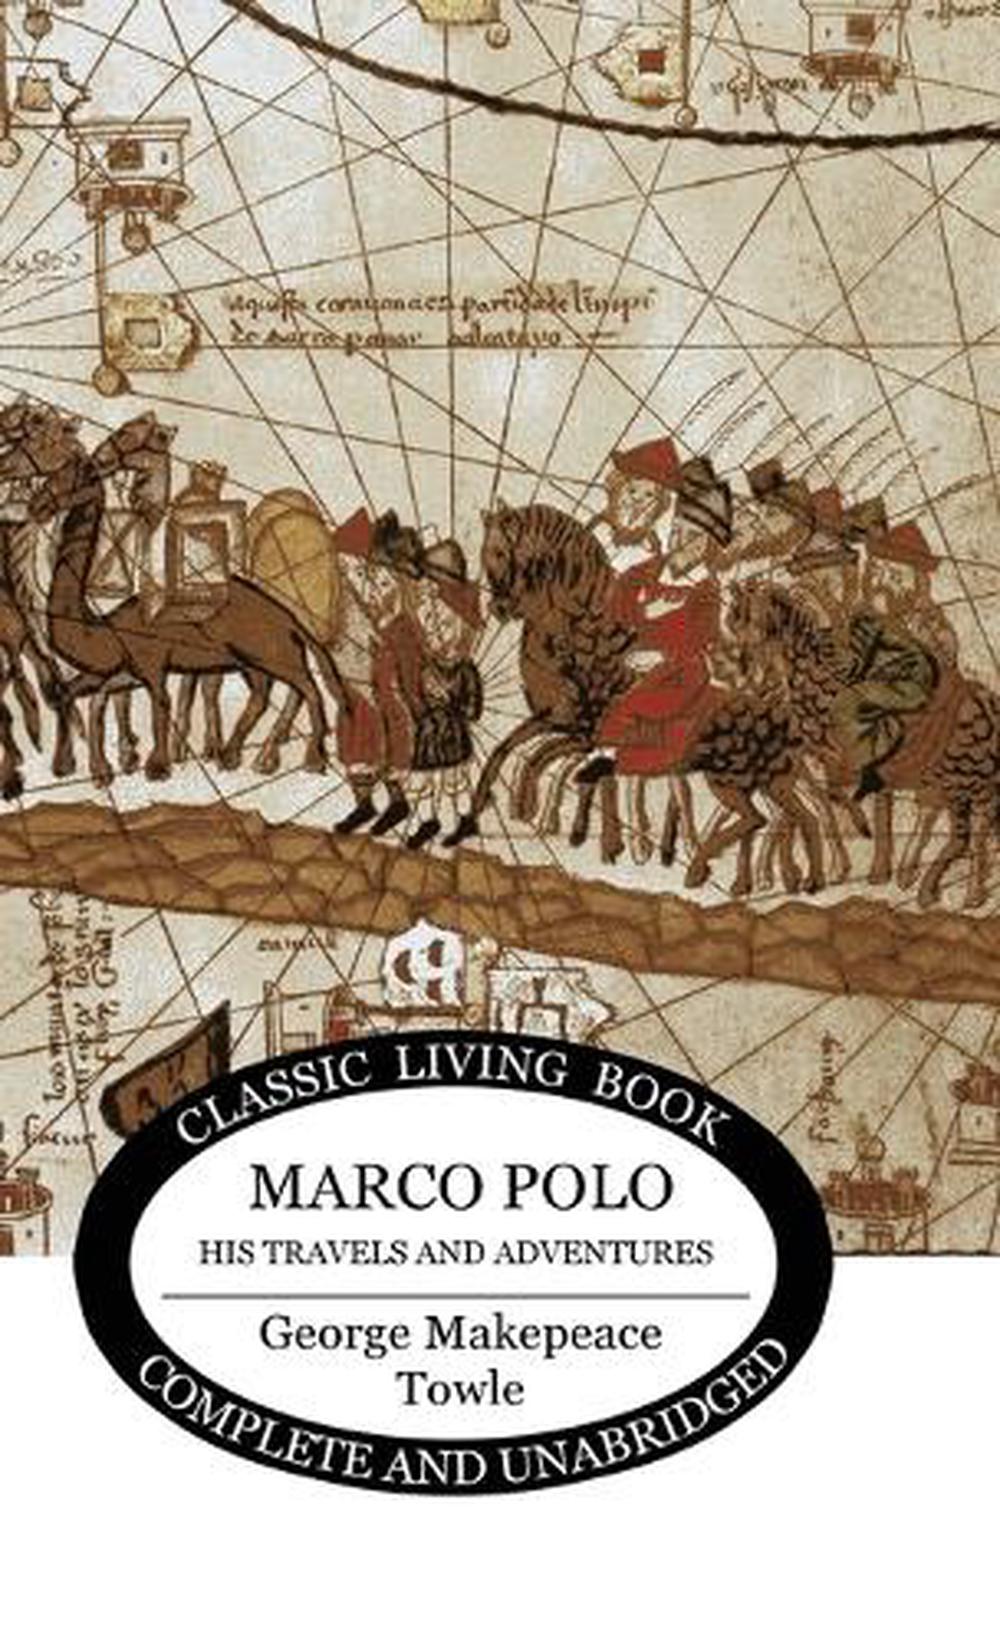 the book of marco polo